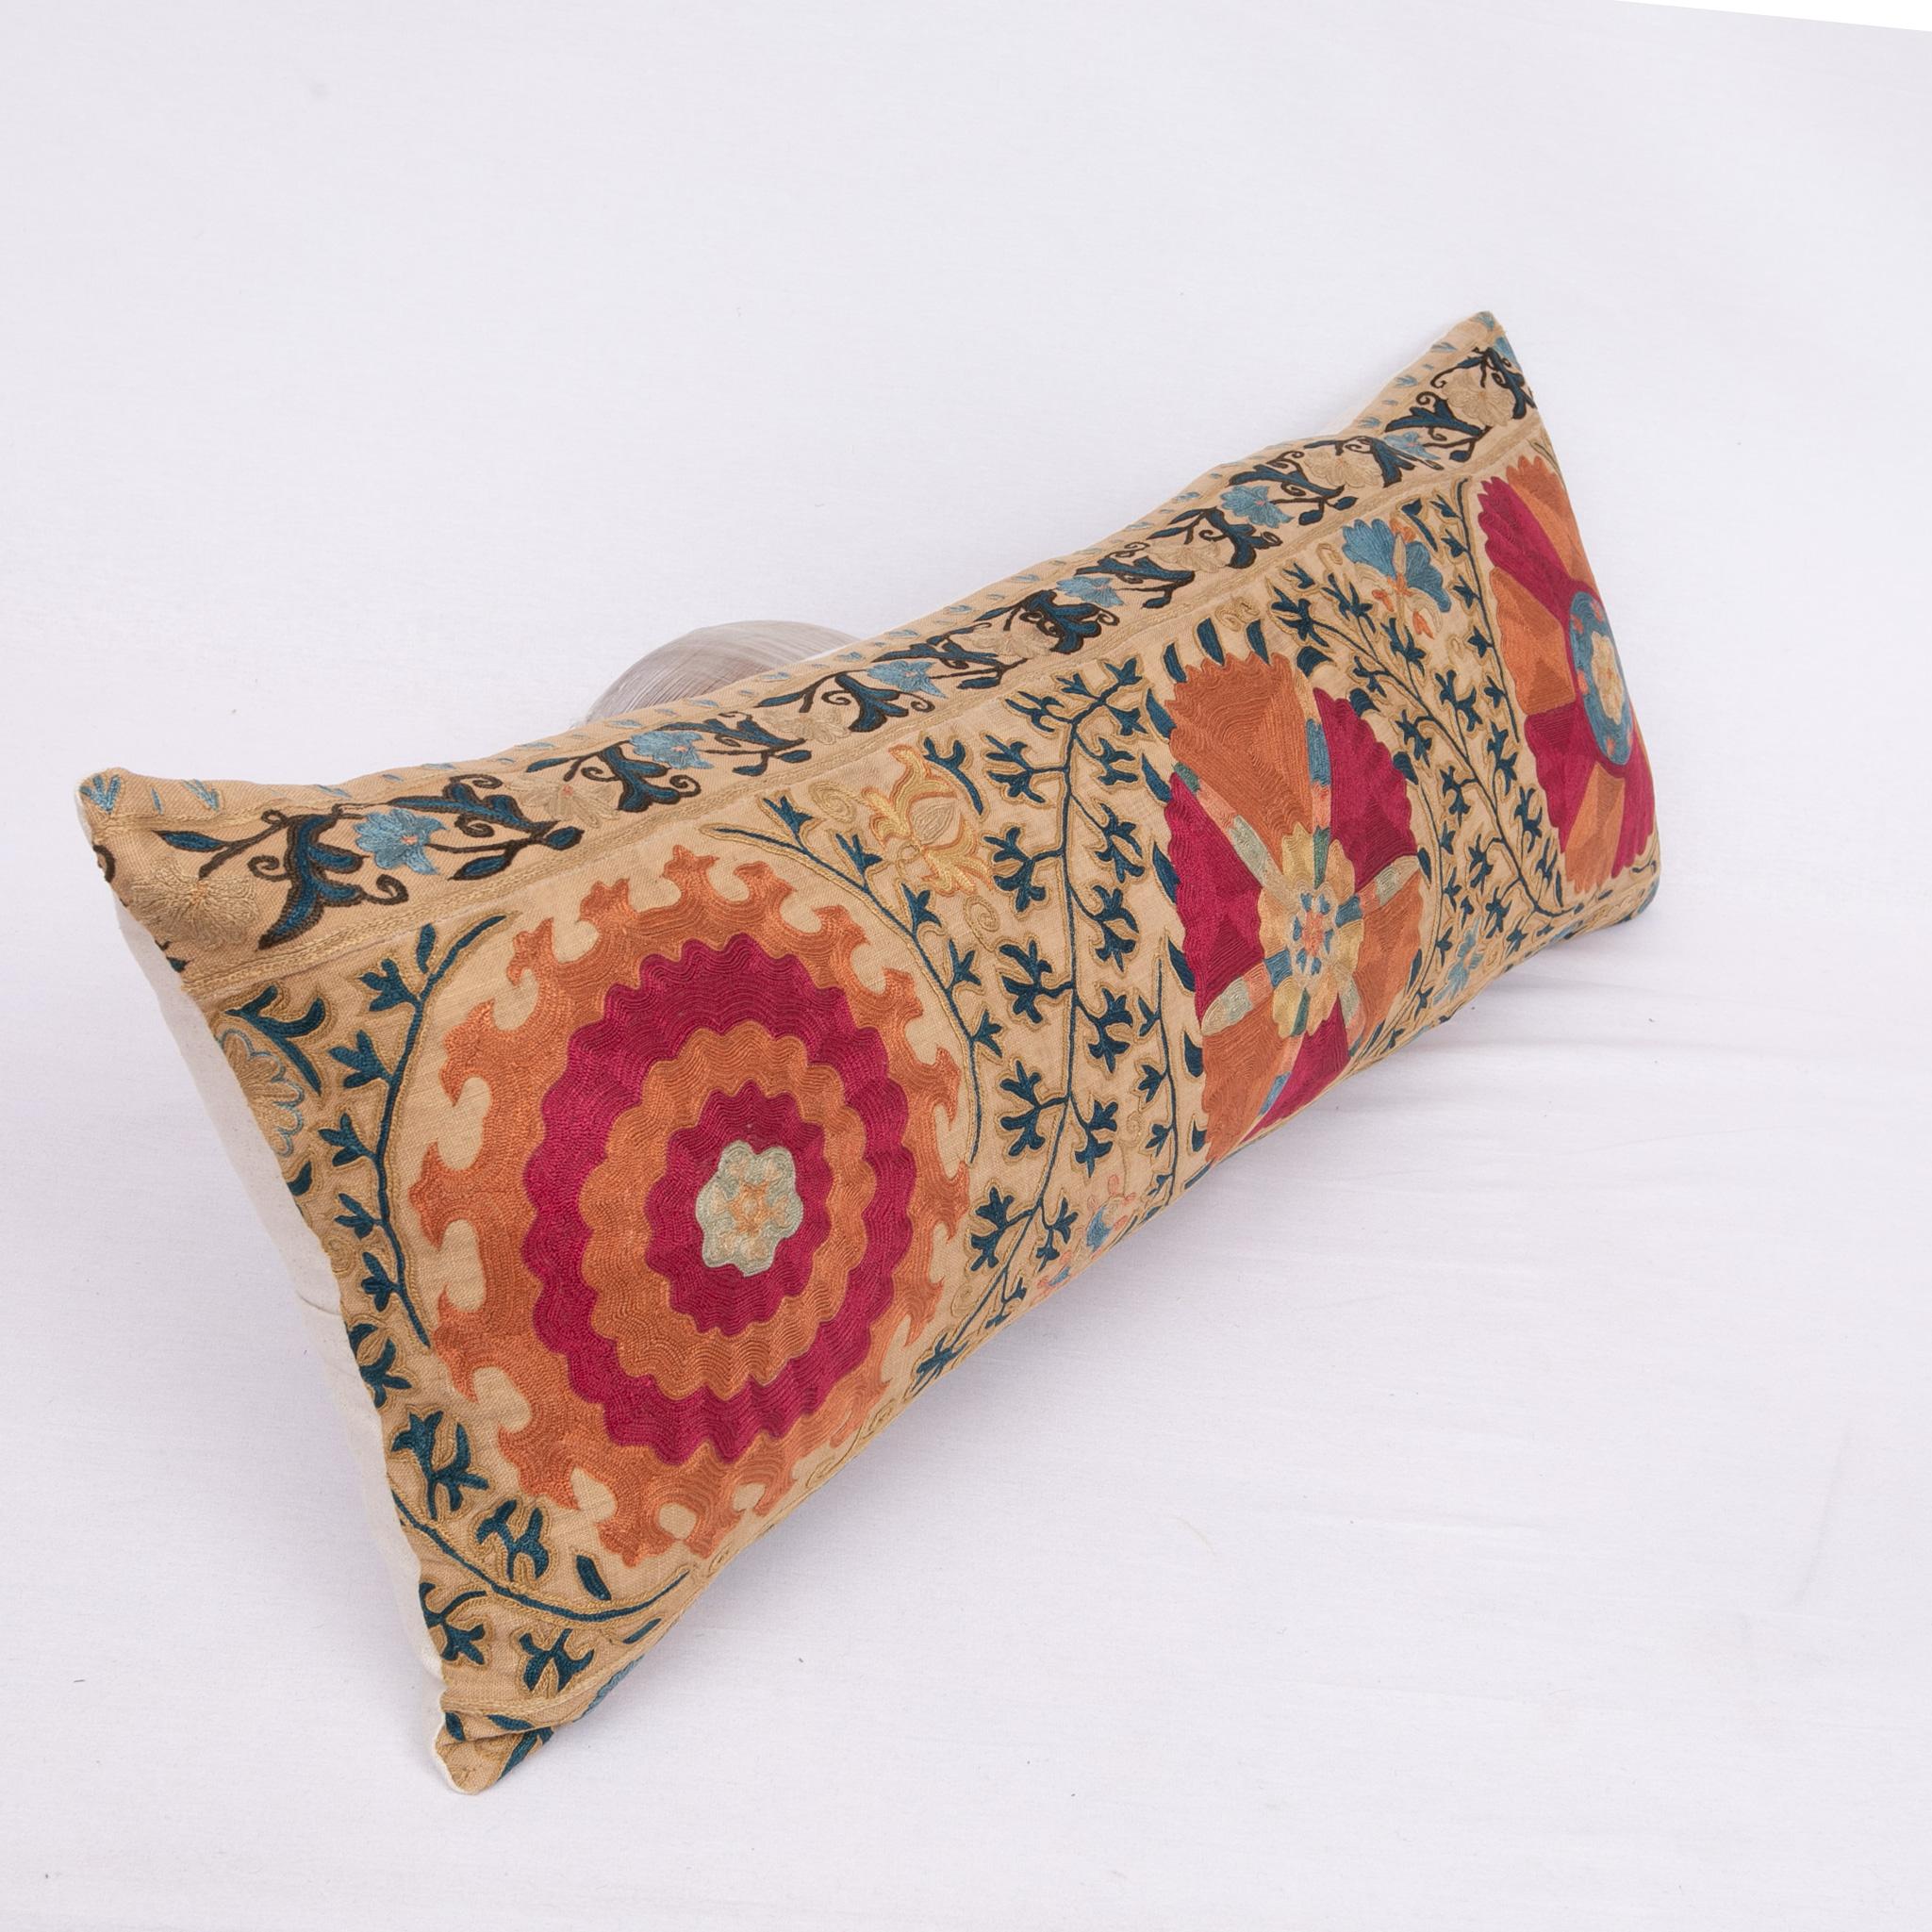 19th Century Antique Suzani Pillowcase / Cushion Cover Made from a Mid 19th c Suzani